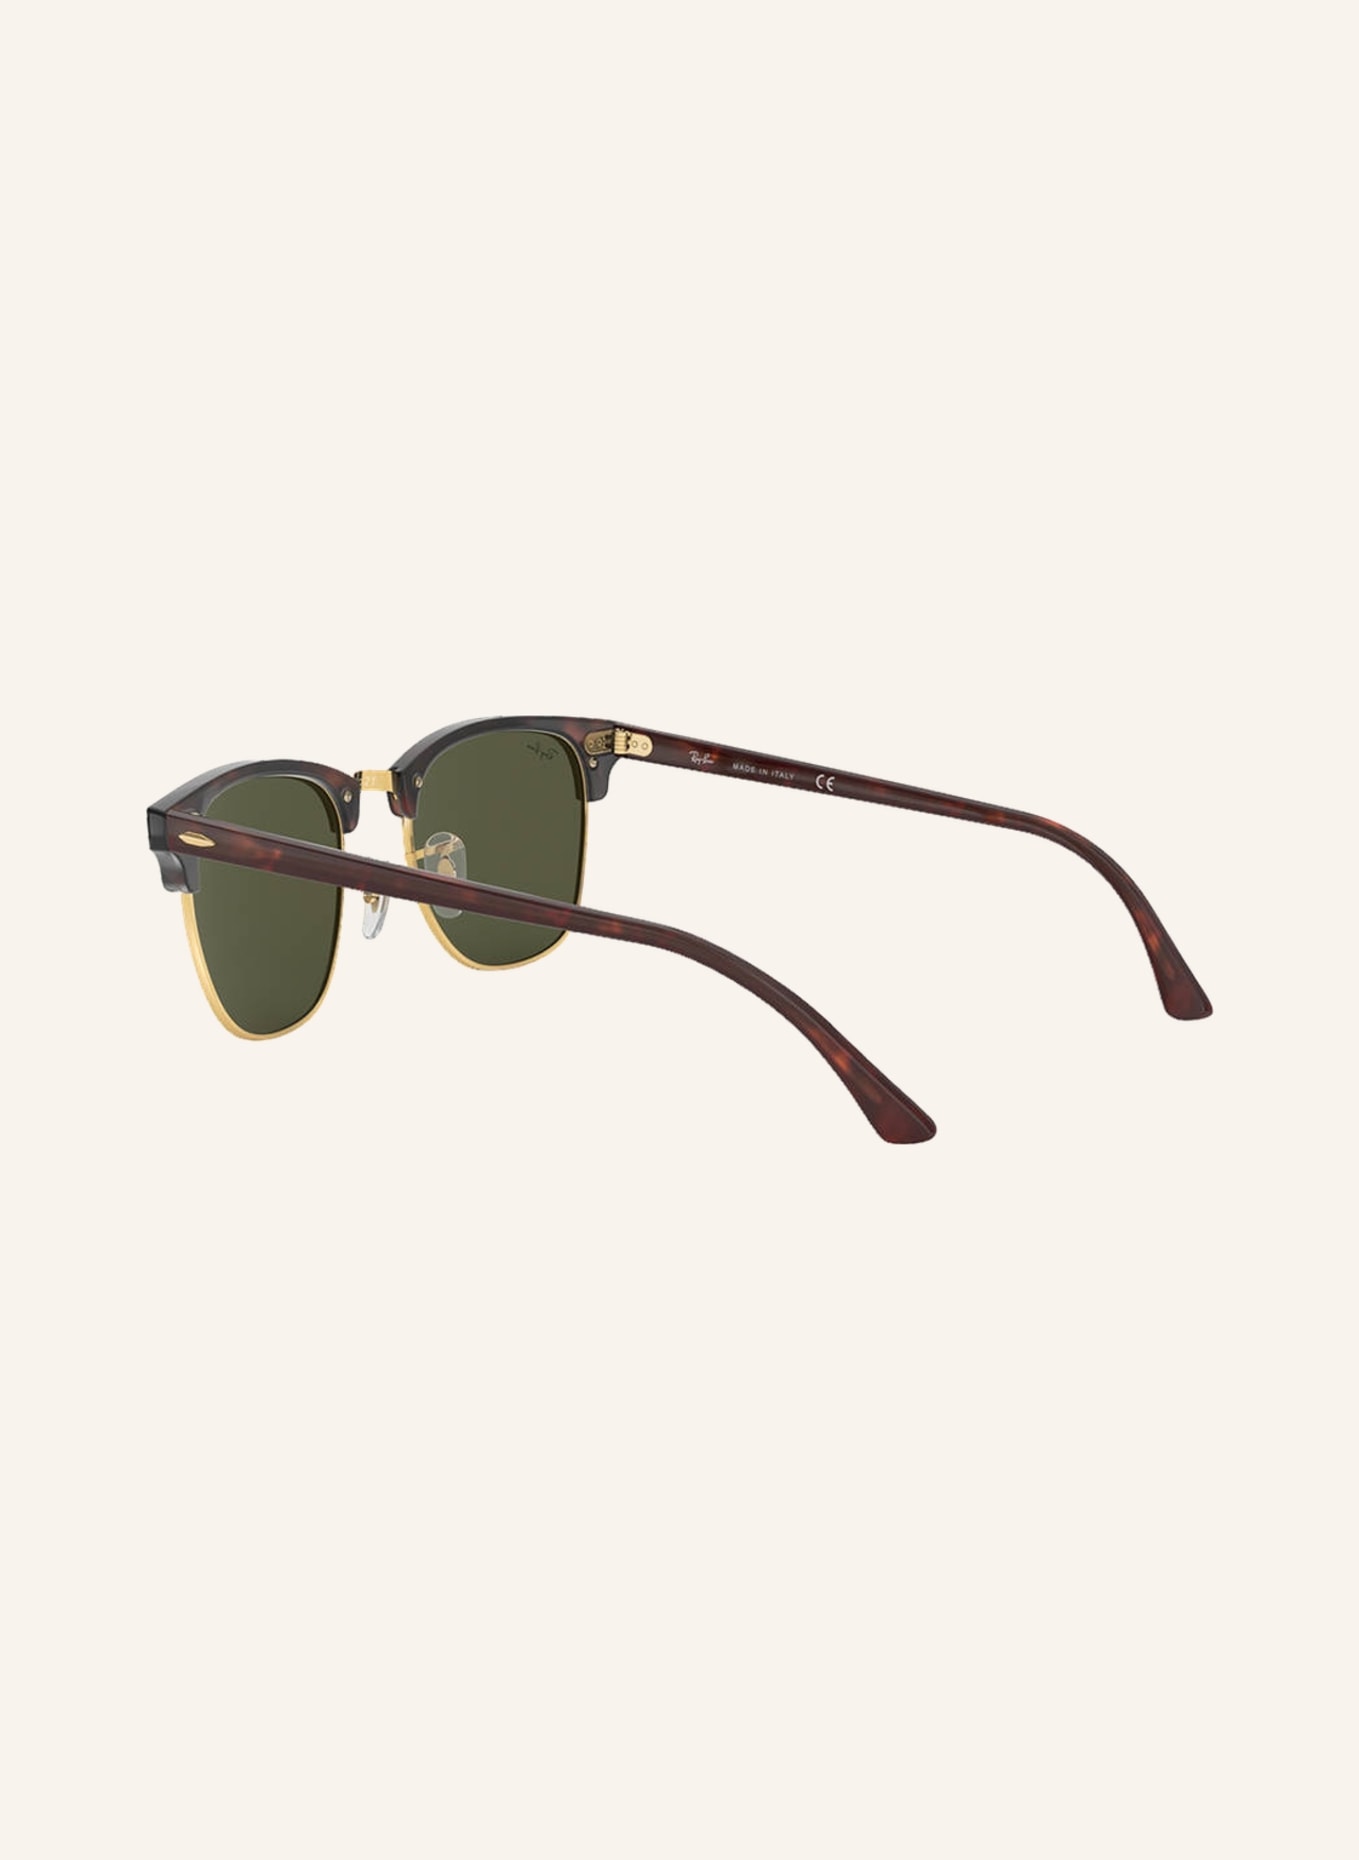 Ray-Ban Sunglasses RB3016 CLUBMASTER, Color: W0366 - HAVANA/GOLD/DARK GREEN (Image 4)